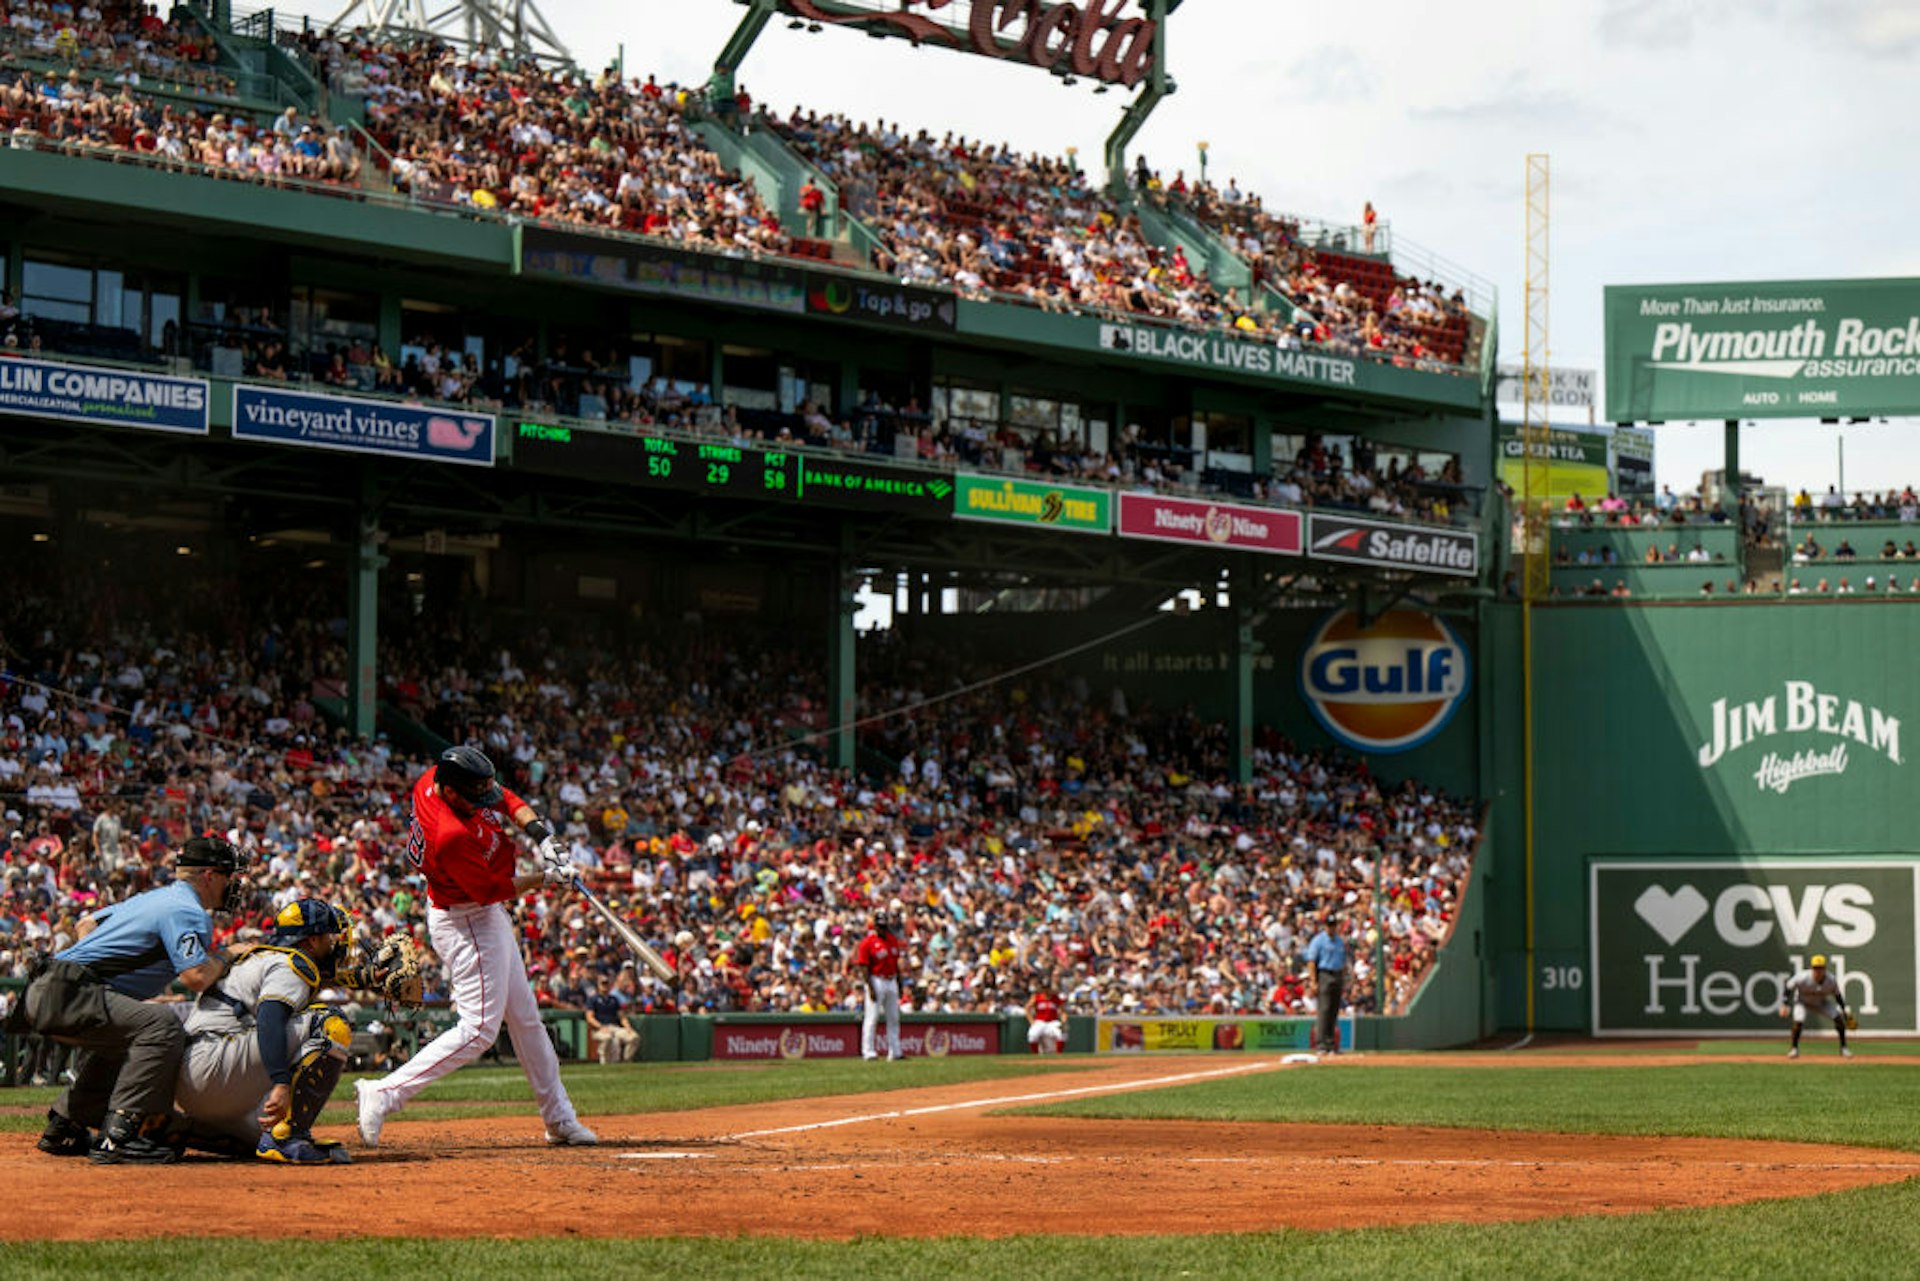  J.D. Martinez #28 of the Boston Red Sox hits a double during the fourth inning of a game against the Milwaukee Brewers on July 31, 2022 at Fenway Park in Boston, Massachusetts.